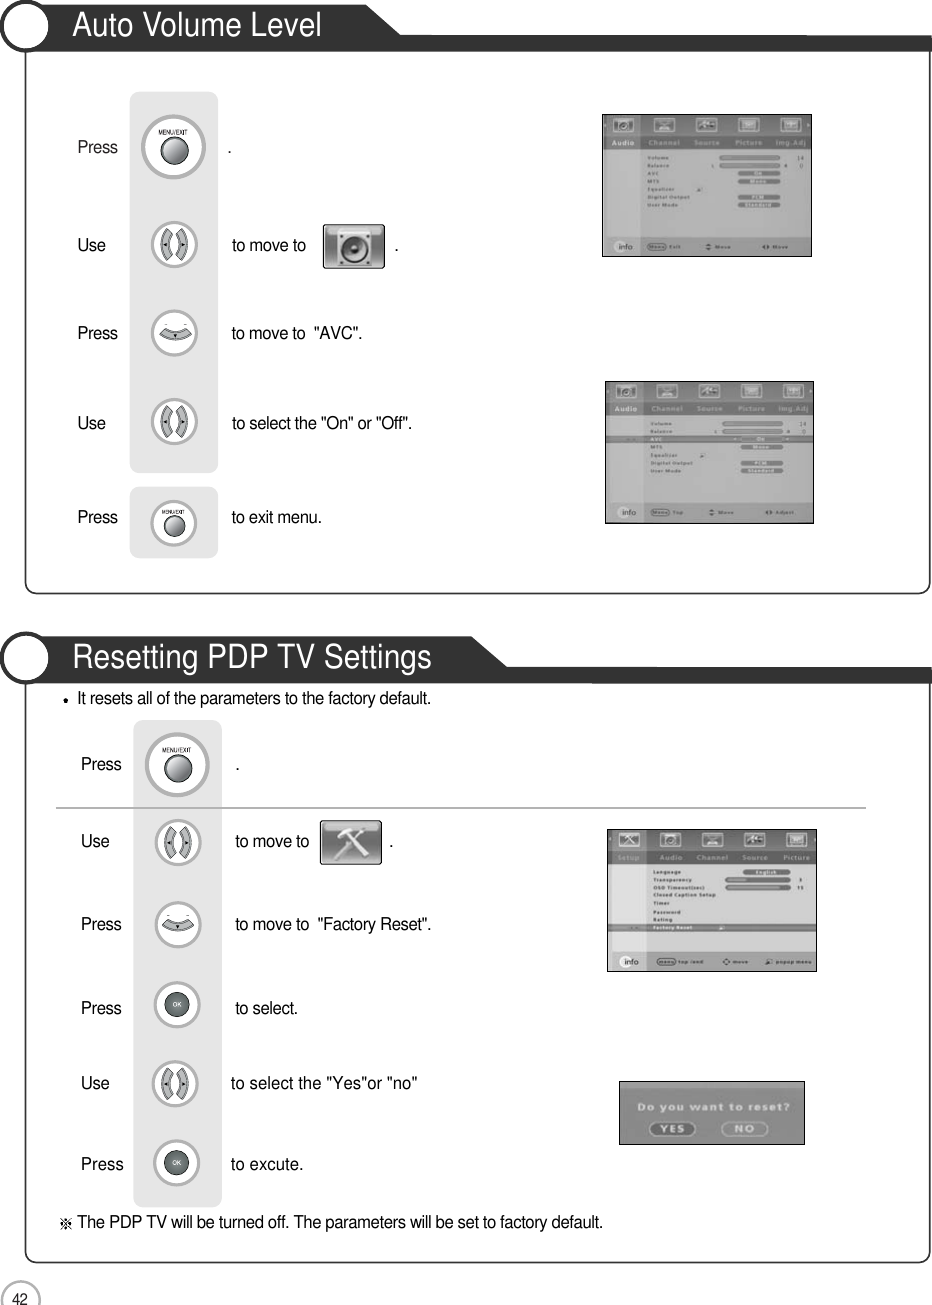 Press                          .                 42Auto Volume LevelResetting PDP TV SettingsApplicationIt resets all of the parameters to the factory default.The PDP TV will be turned off. The parameters will be set to factory default.Use                              to move to                   .                  Press                           to move to  &quot;Factory Reset&quot;. Press                           to select.Use to select the &quot;Yes&quot;or &quot;no&quot;   Press to excute.     Press                           .Use                              to move to                     .                 Press                           to move to  &quot;AVC&quot;. Use                             to select the &quot;On&quot; or &quot;Off&quot;.Press                           to exit menu. 